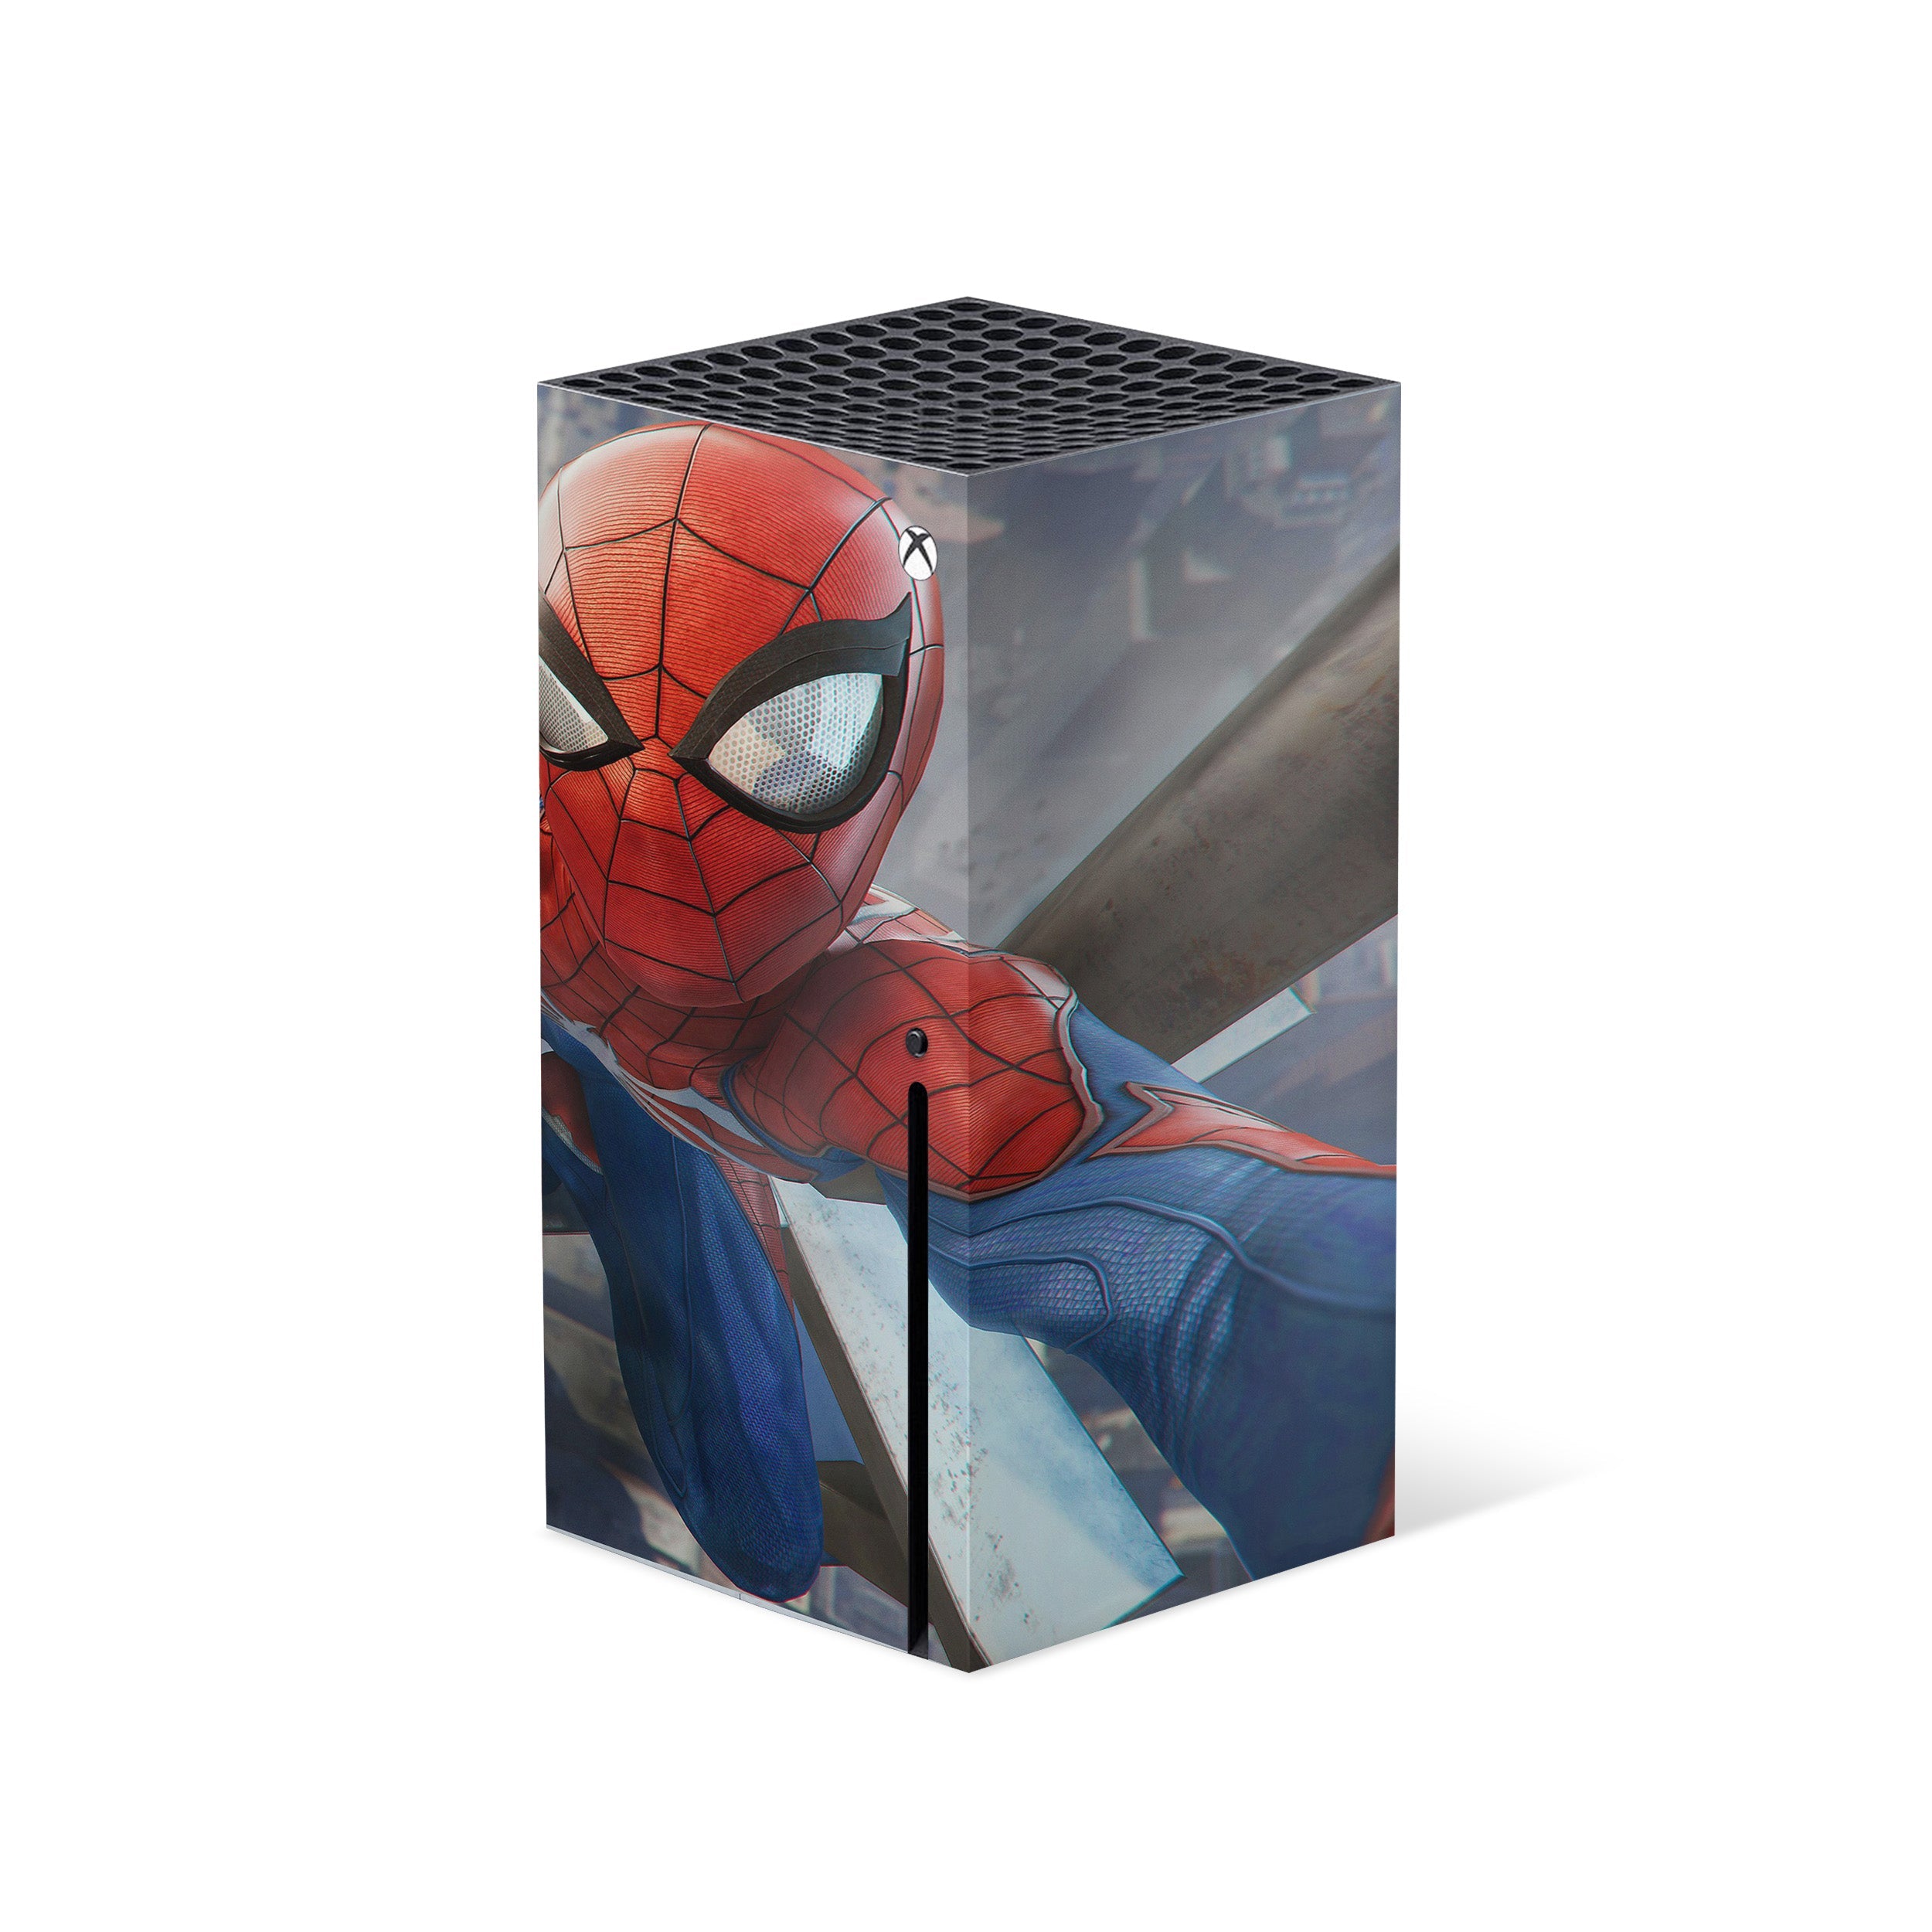 A video game skin featuring a Marvel Spiderman design for the Xbox Series X.